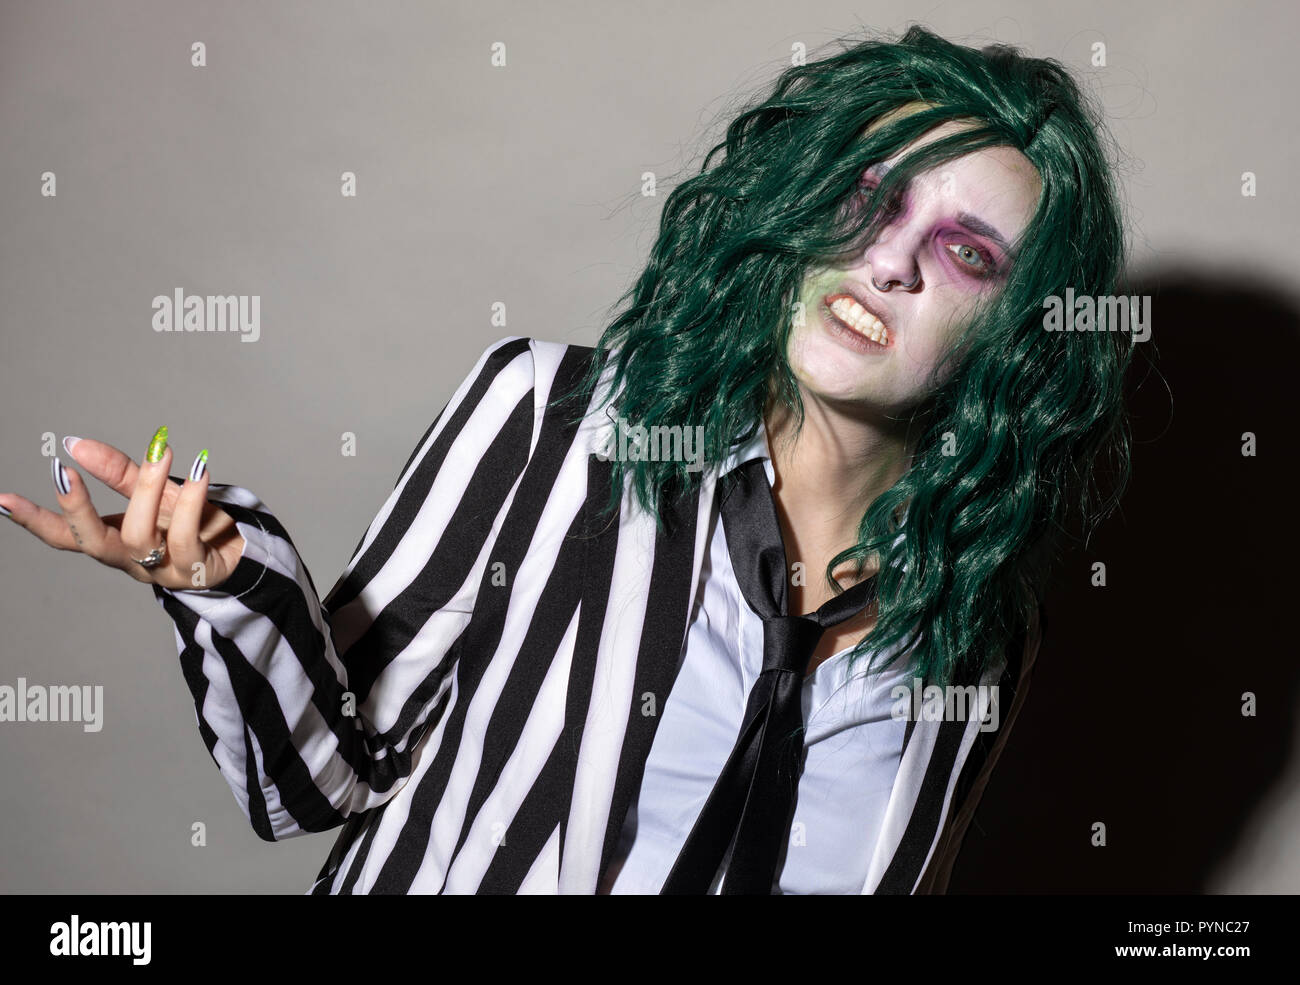 A young woman dresses up for Halloween in a pinstripe suit and green hair  Stock Photo - Alamy